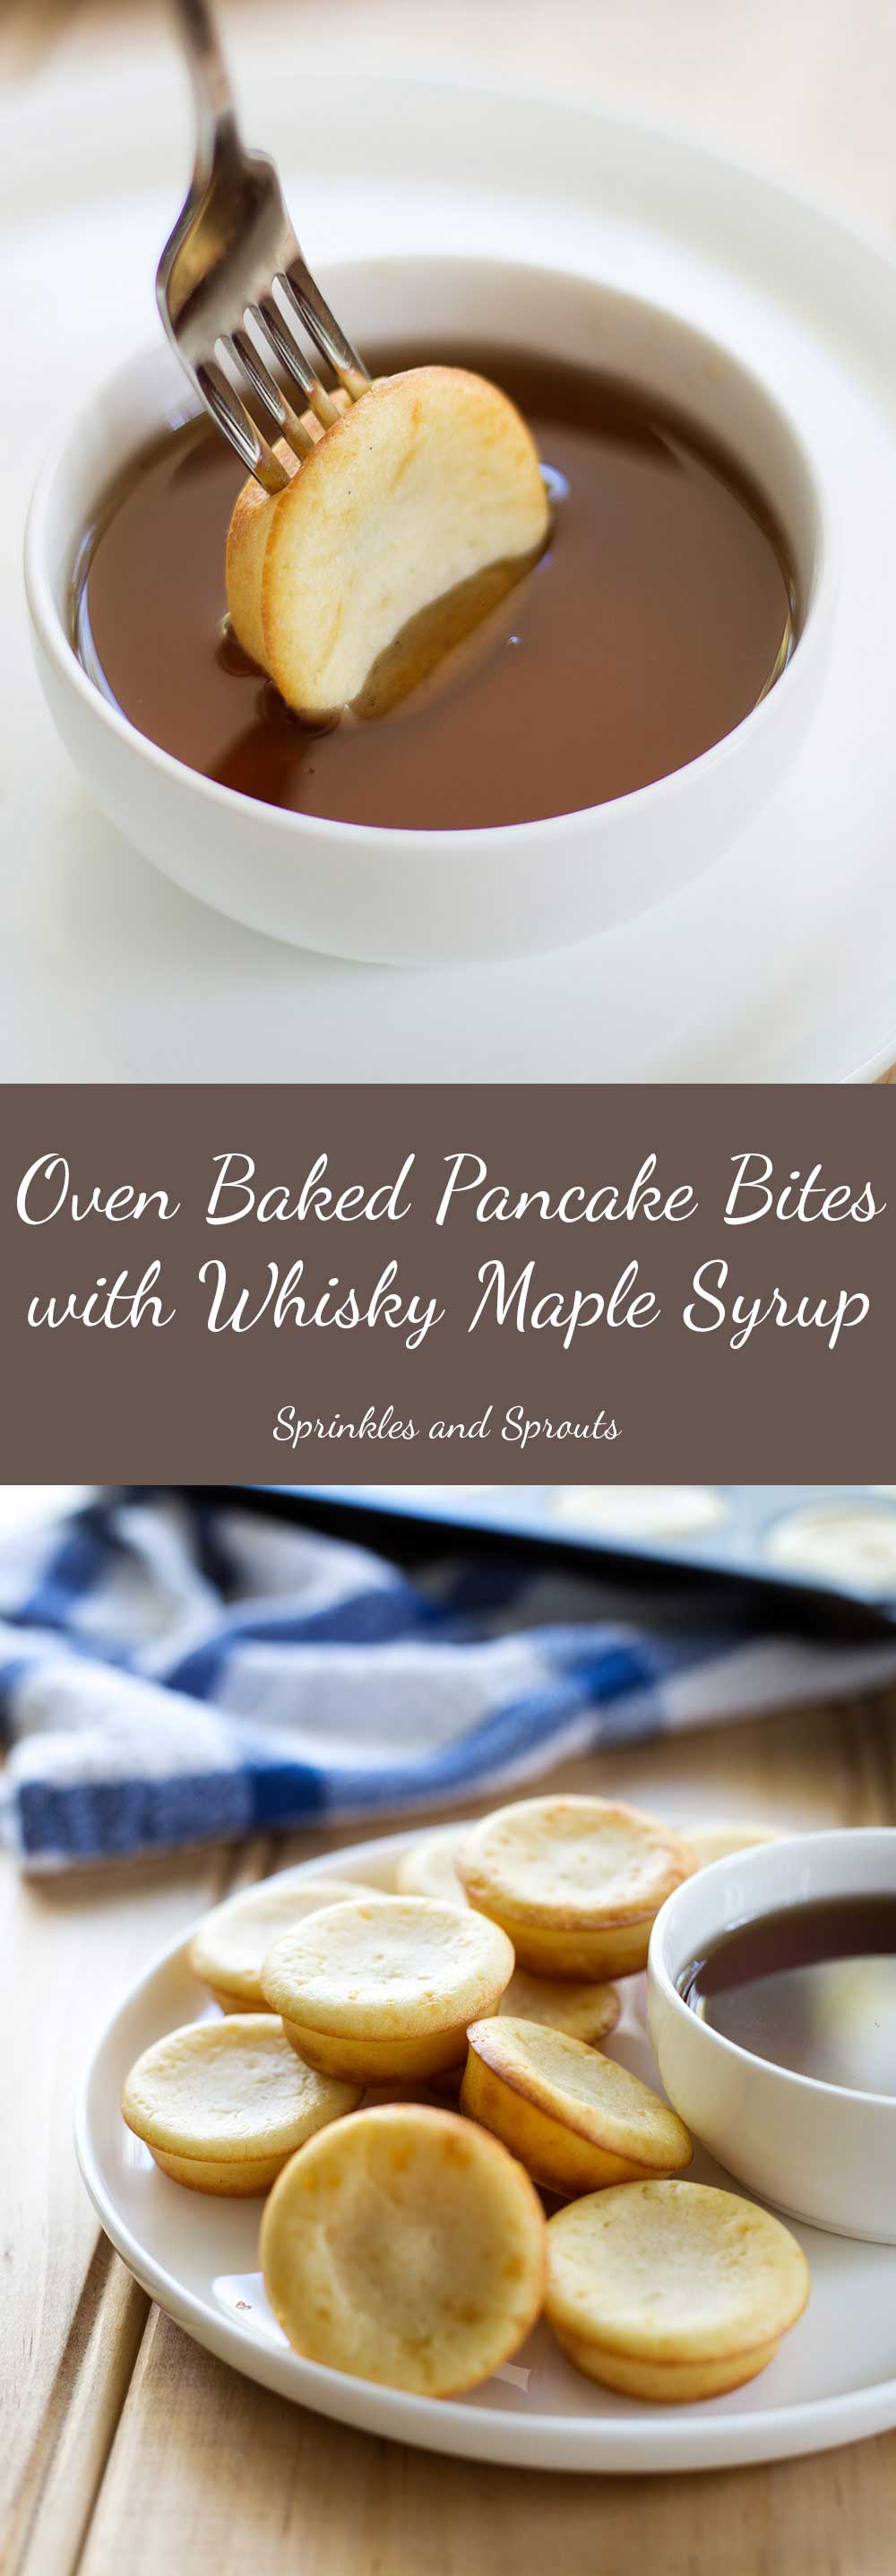 Oven Baked Pancake Bites with Whisky Maple Syrup. They look like cupcakes and taste like pancakes. The perfect treat for breakfast.